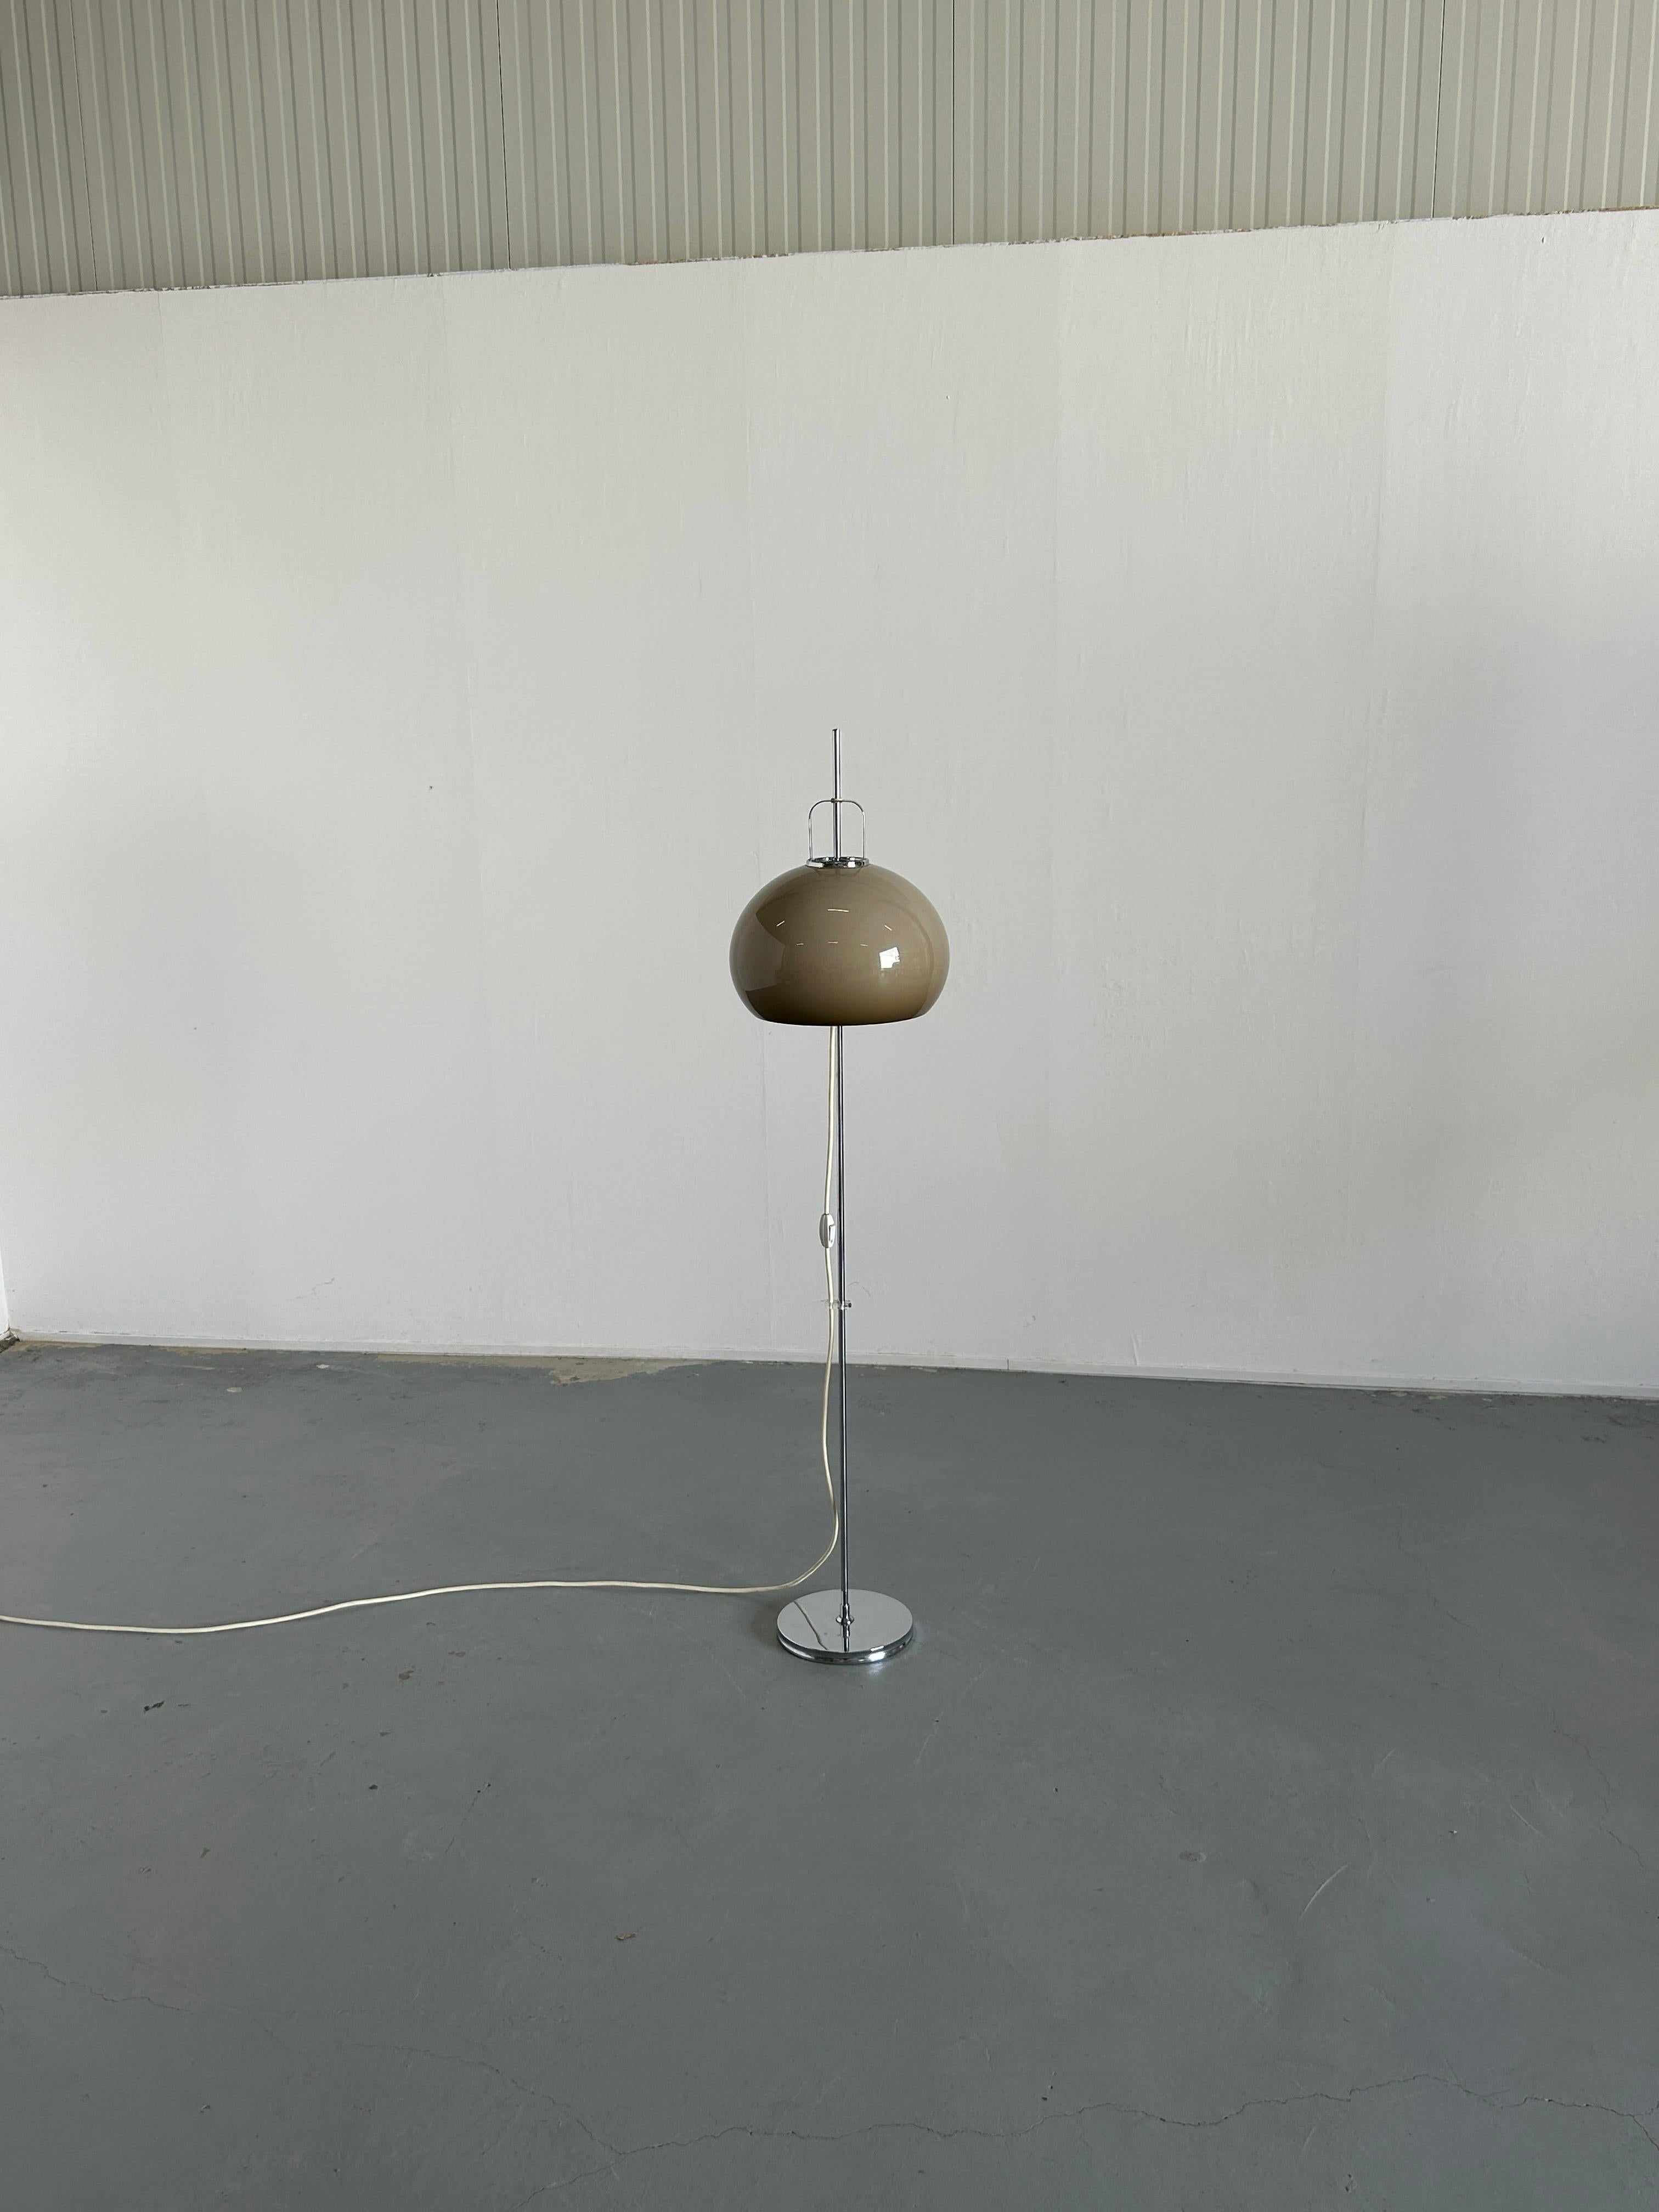 A beautiful brown Mid-Century Modern floor lamp, model 'Lucerna', designed by Harvey Guzzini Studio for Meblo in the 1970s. Made from chromed metal and plastic. Can be adjusted to any height. 

The item is in very good original vintage condition